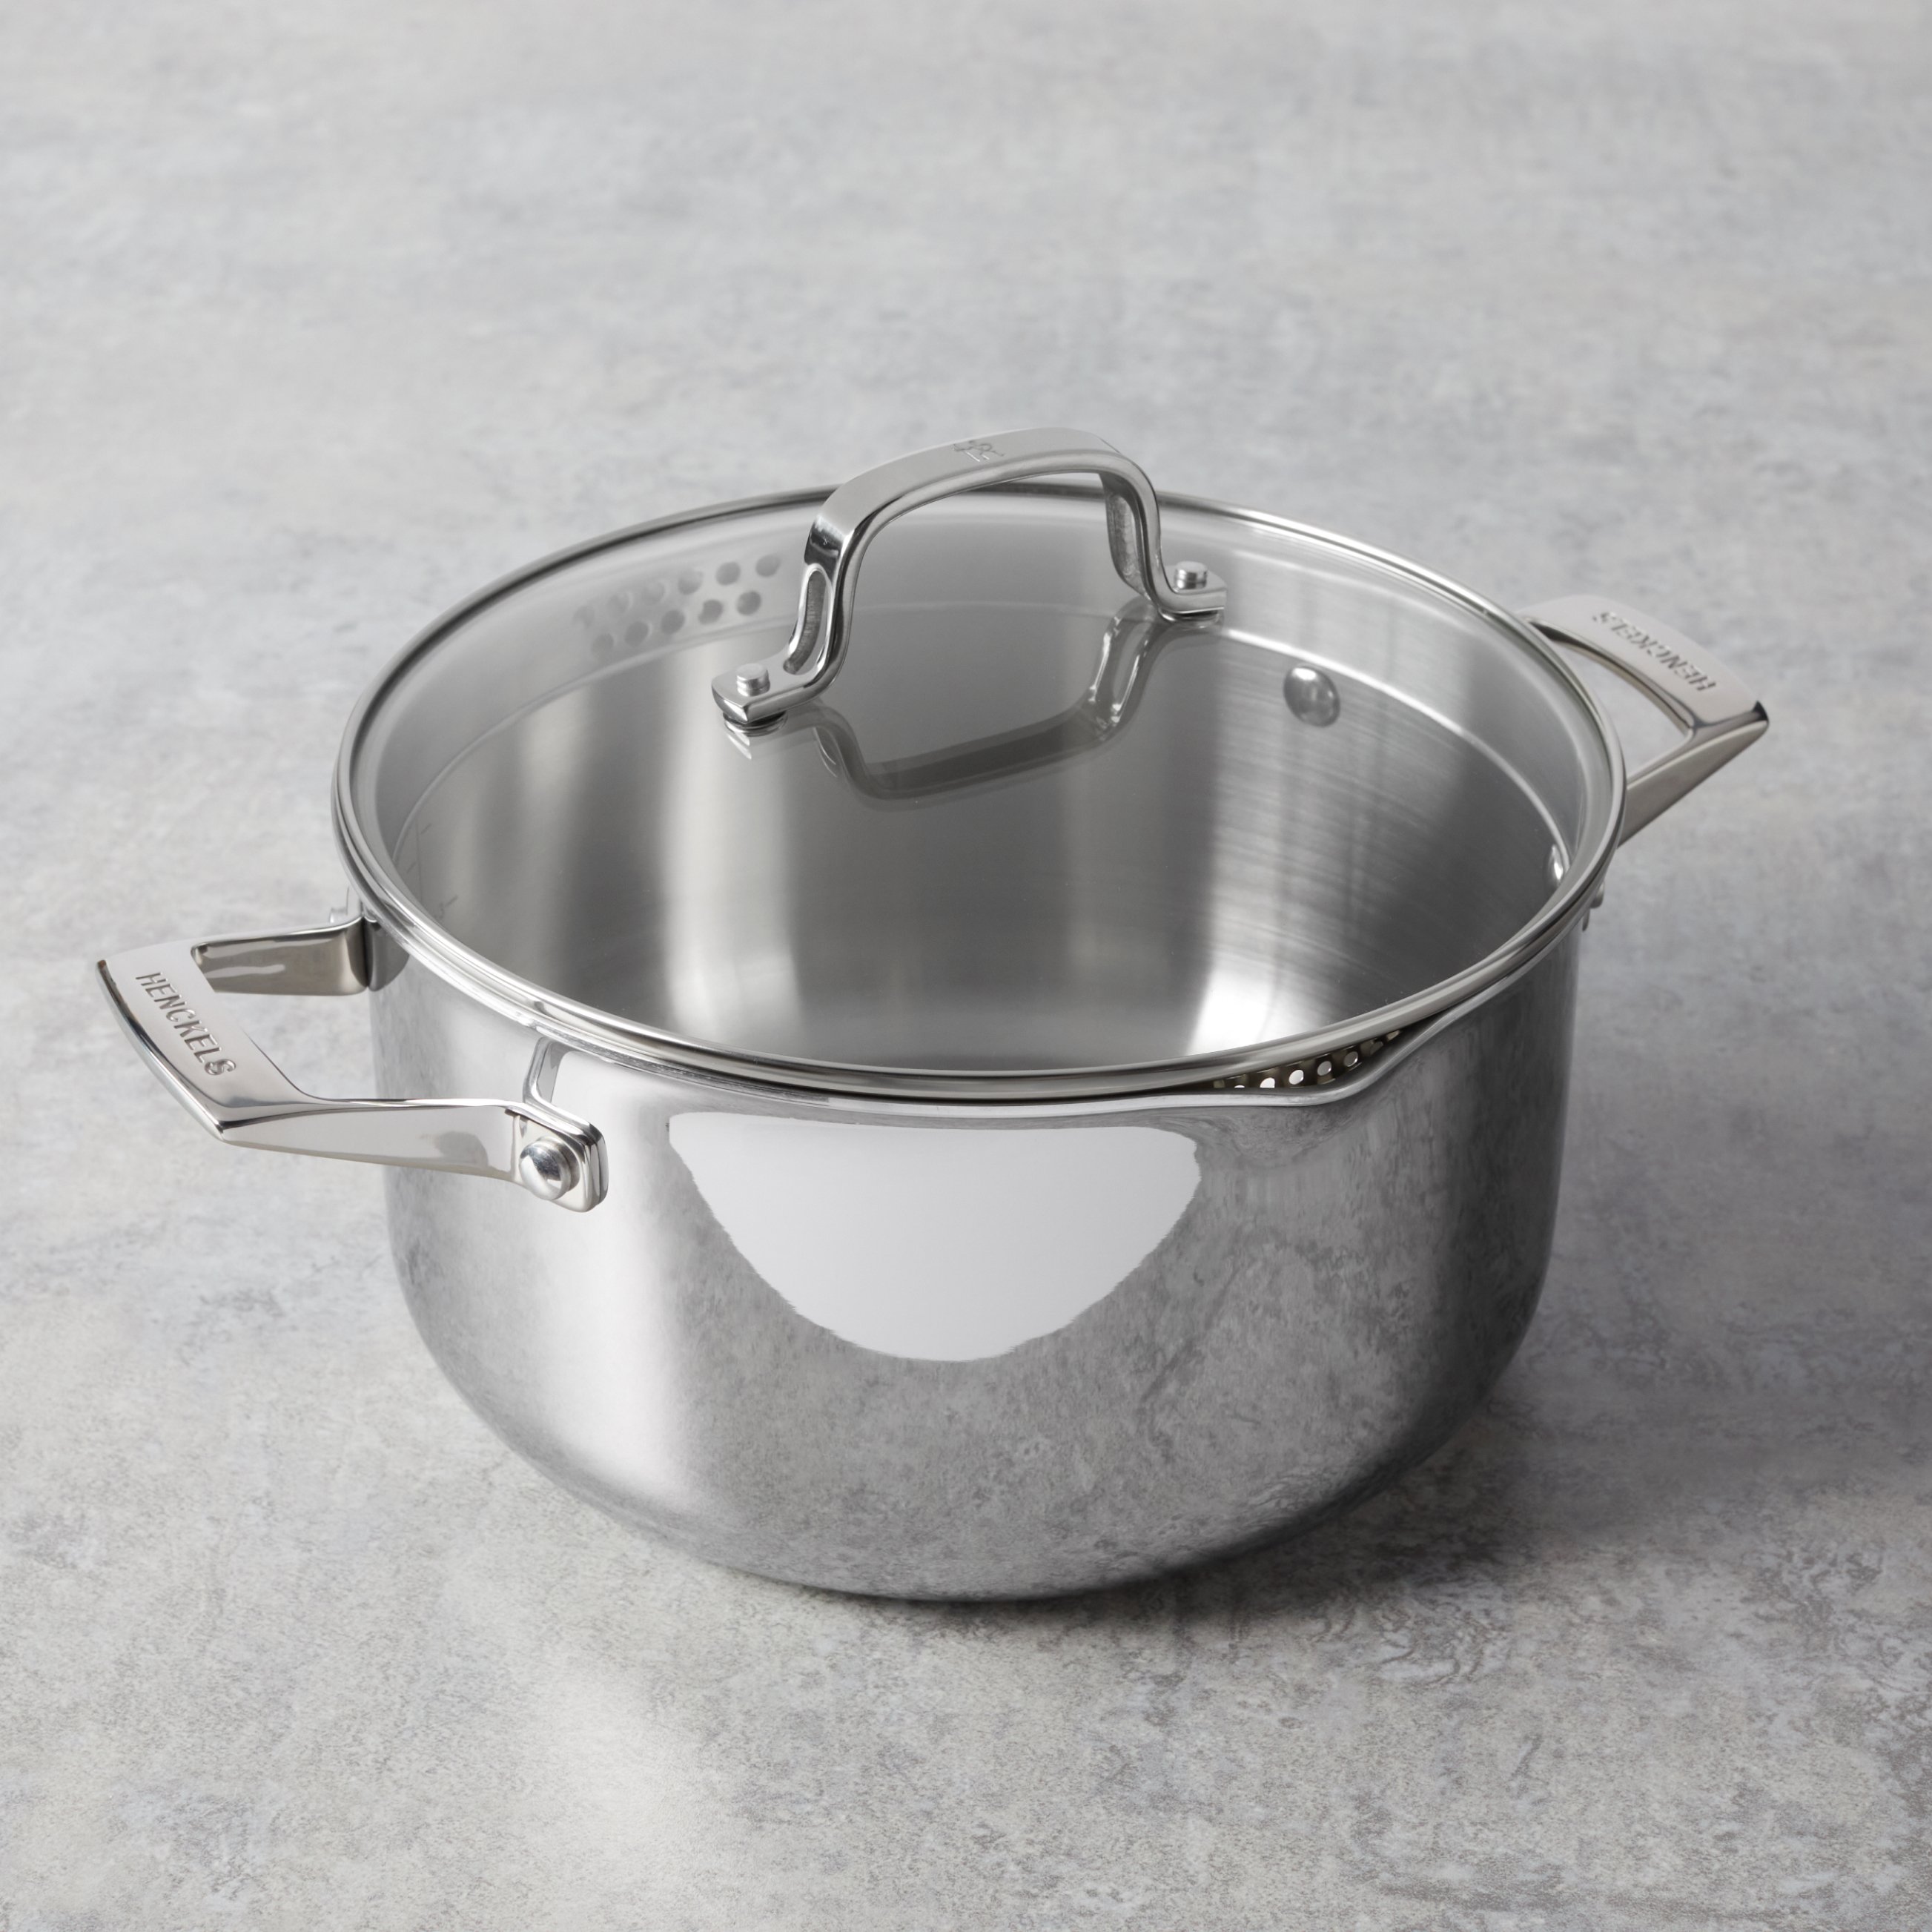 https://www.zwilling.com/on/demandware.static/-/Sites-zwilling-us-Library/default/dw7eff4e56/images/product-content/masonry-content/henckels/cookware/henckels-h3/H3UNCOATED_04.jpg